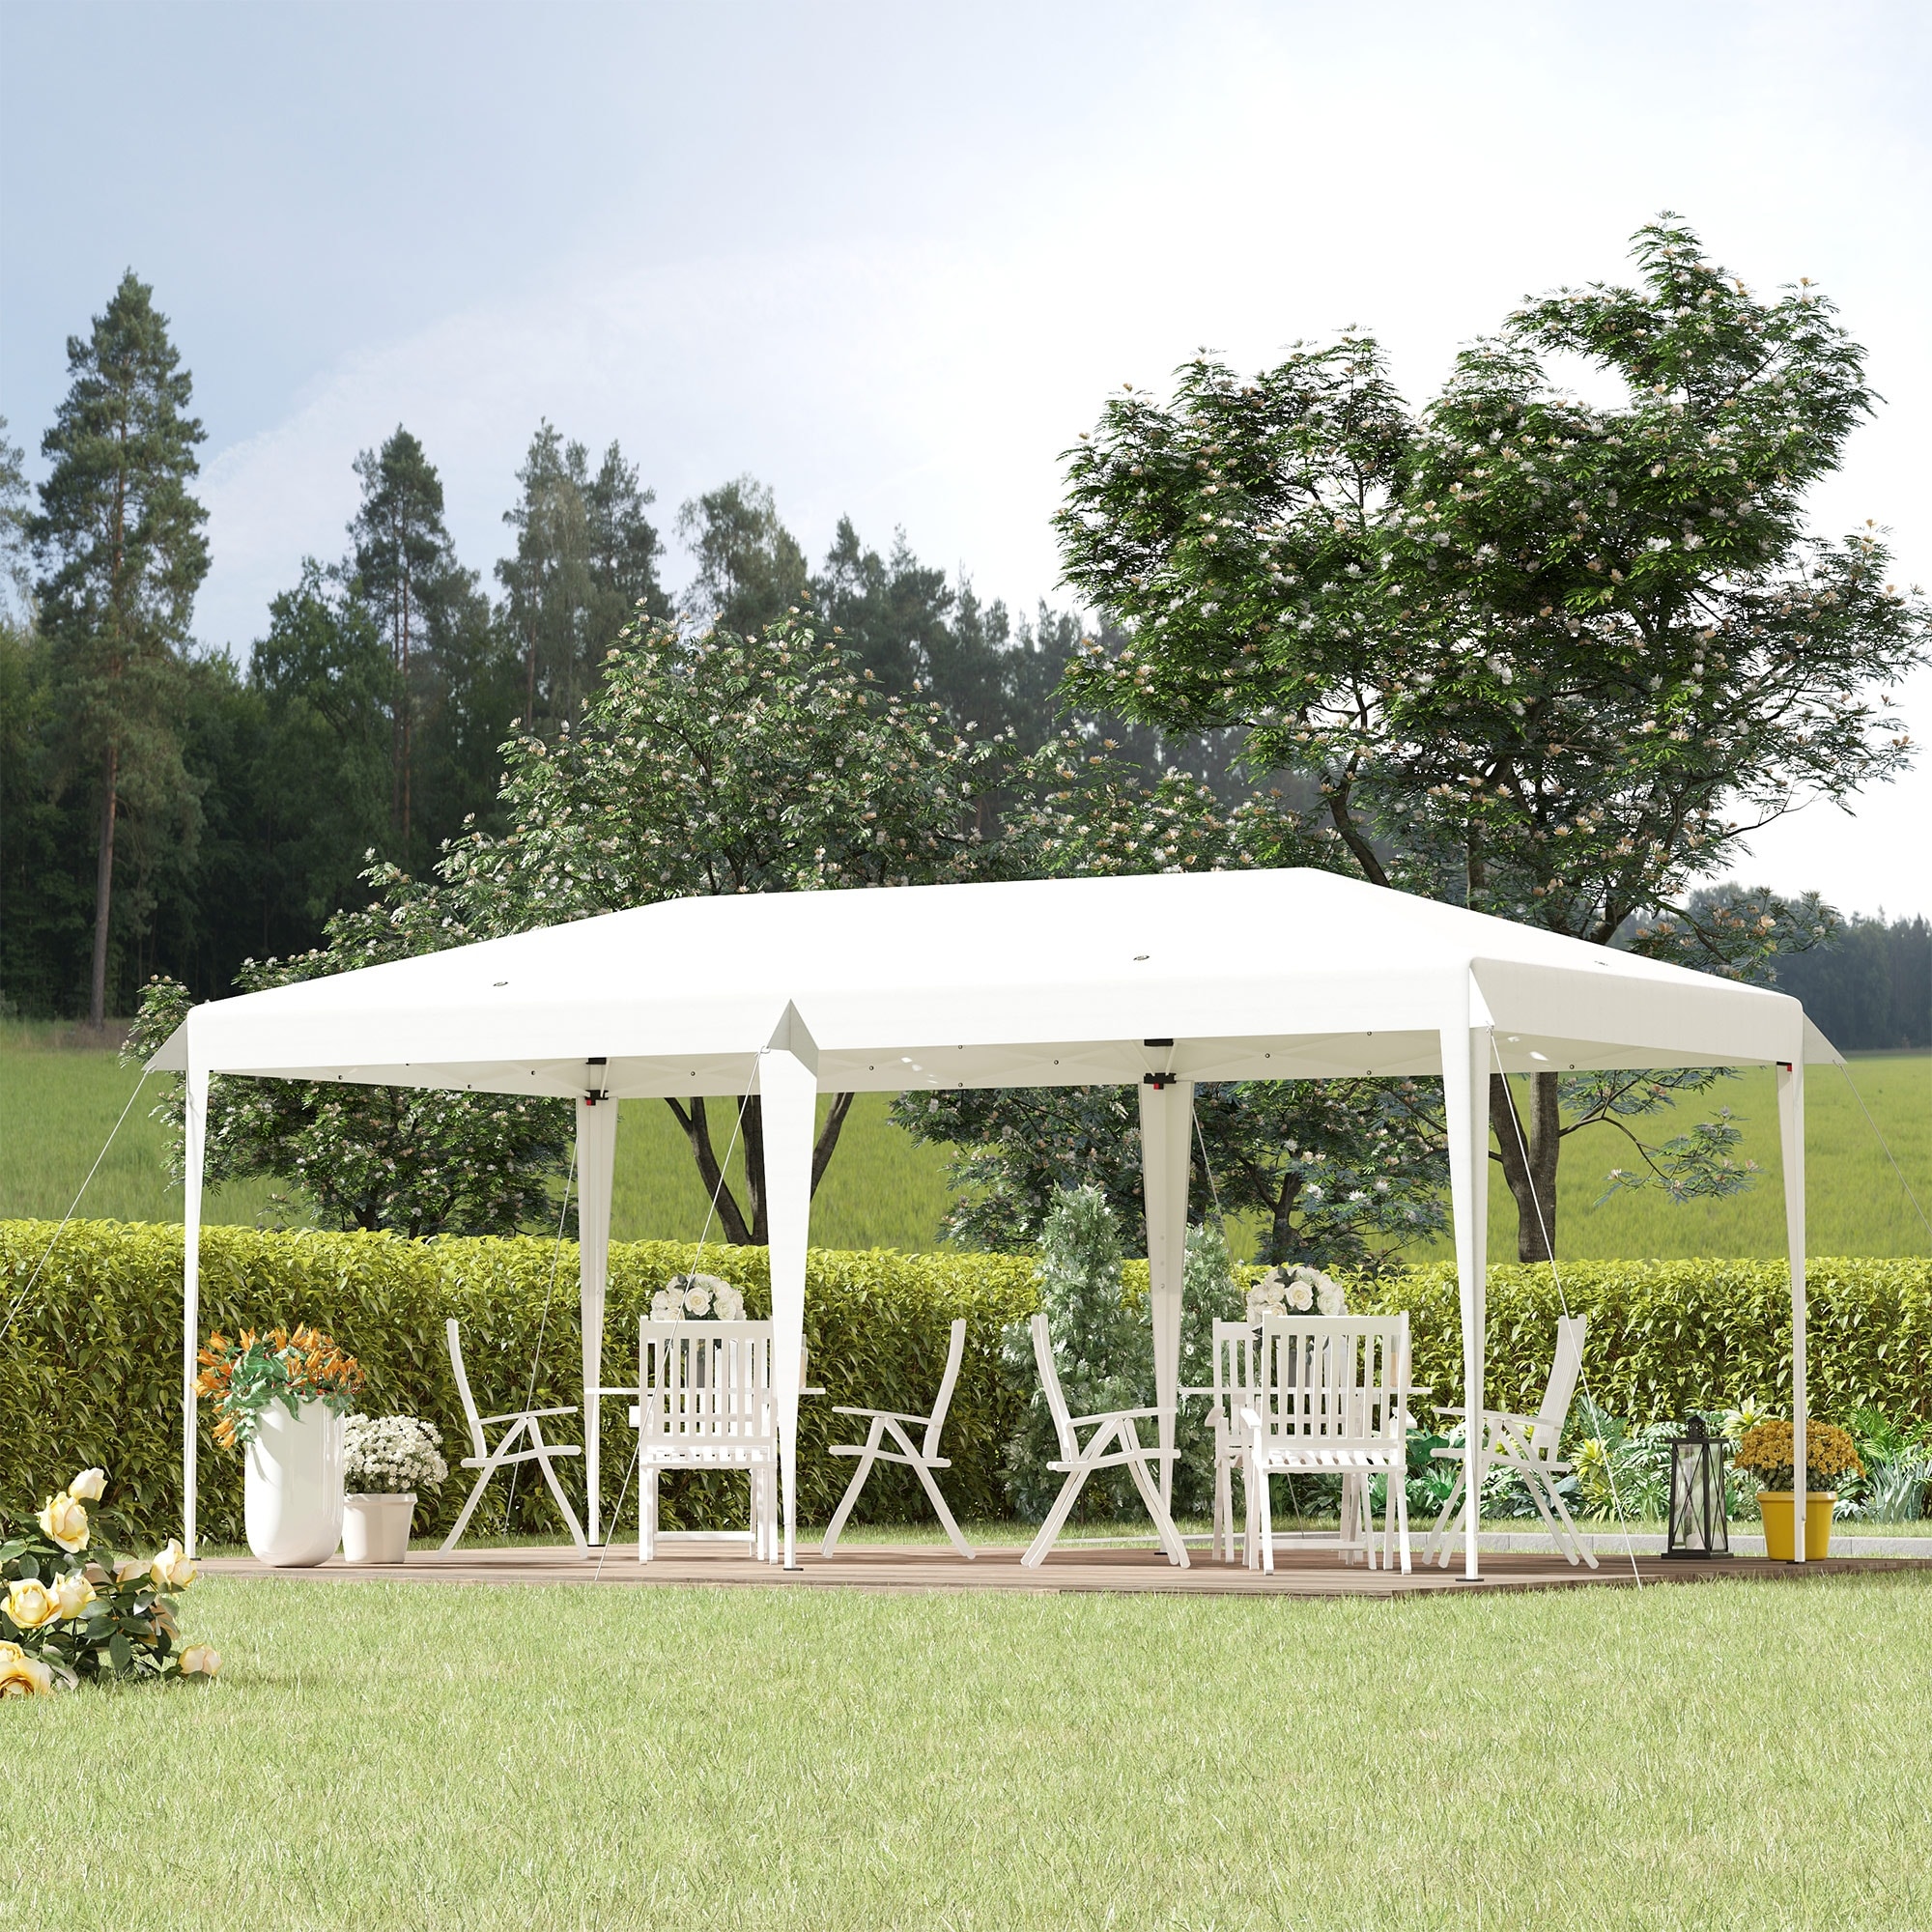 Outsunny 3 x 6 m Garden Pop Up Gazebo, Party Wedding Tent Marquee, Water  Resistant Awning Canopy with Sidewalls, Windows, Free Carry Bag, Coffee